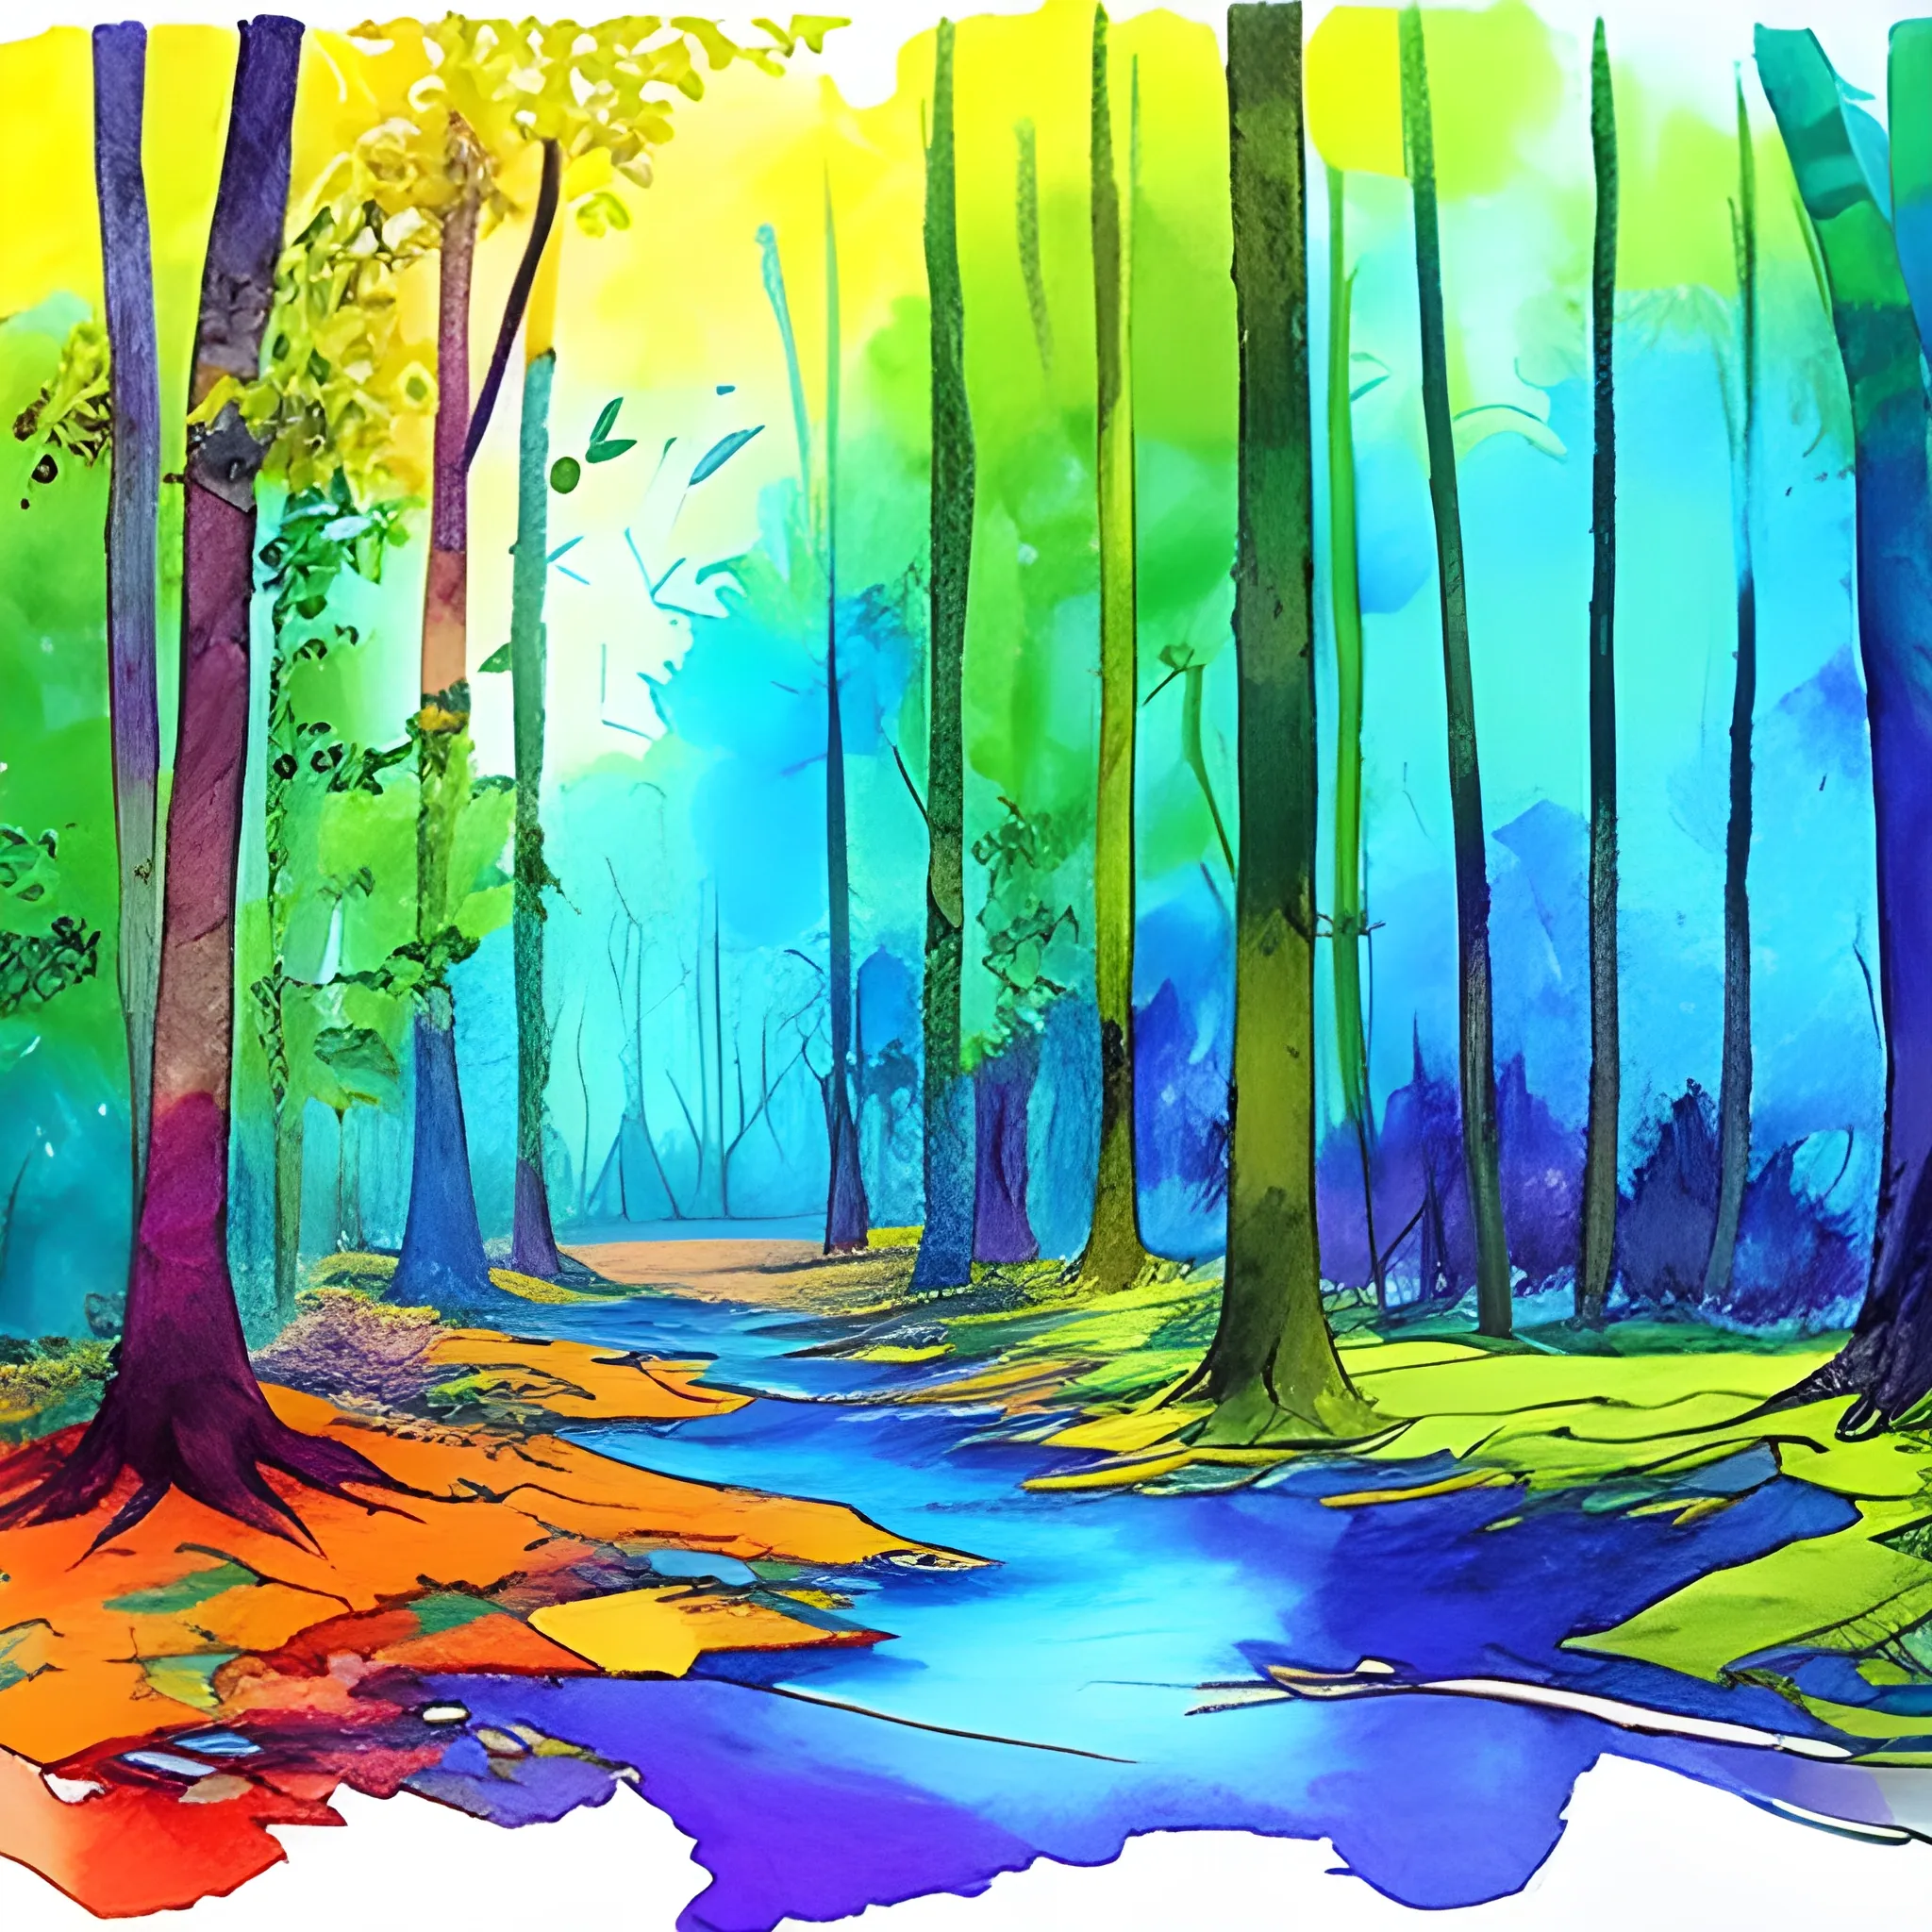 very beautiful forest coloring, blue, yellow, green, purple, orange,,red, book page, Water Color